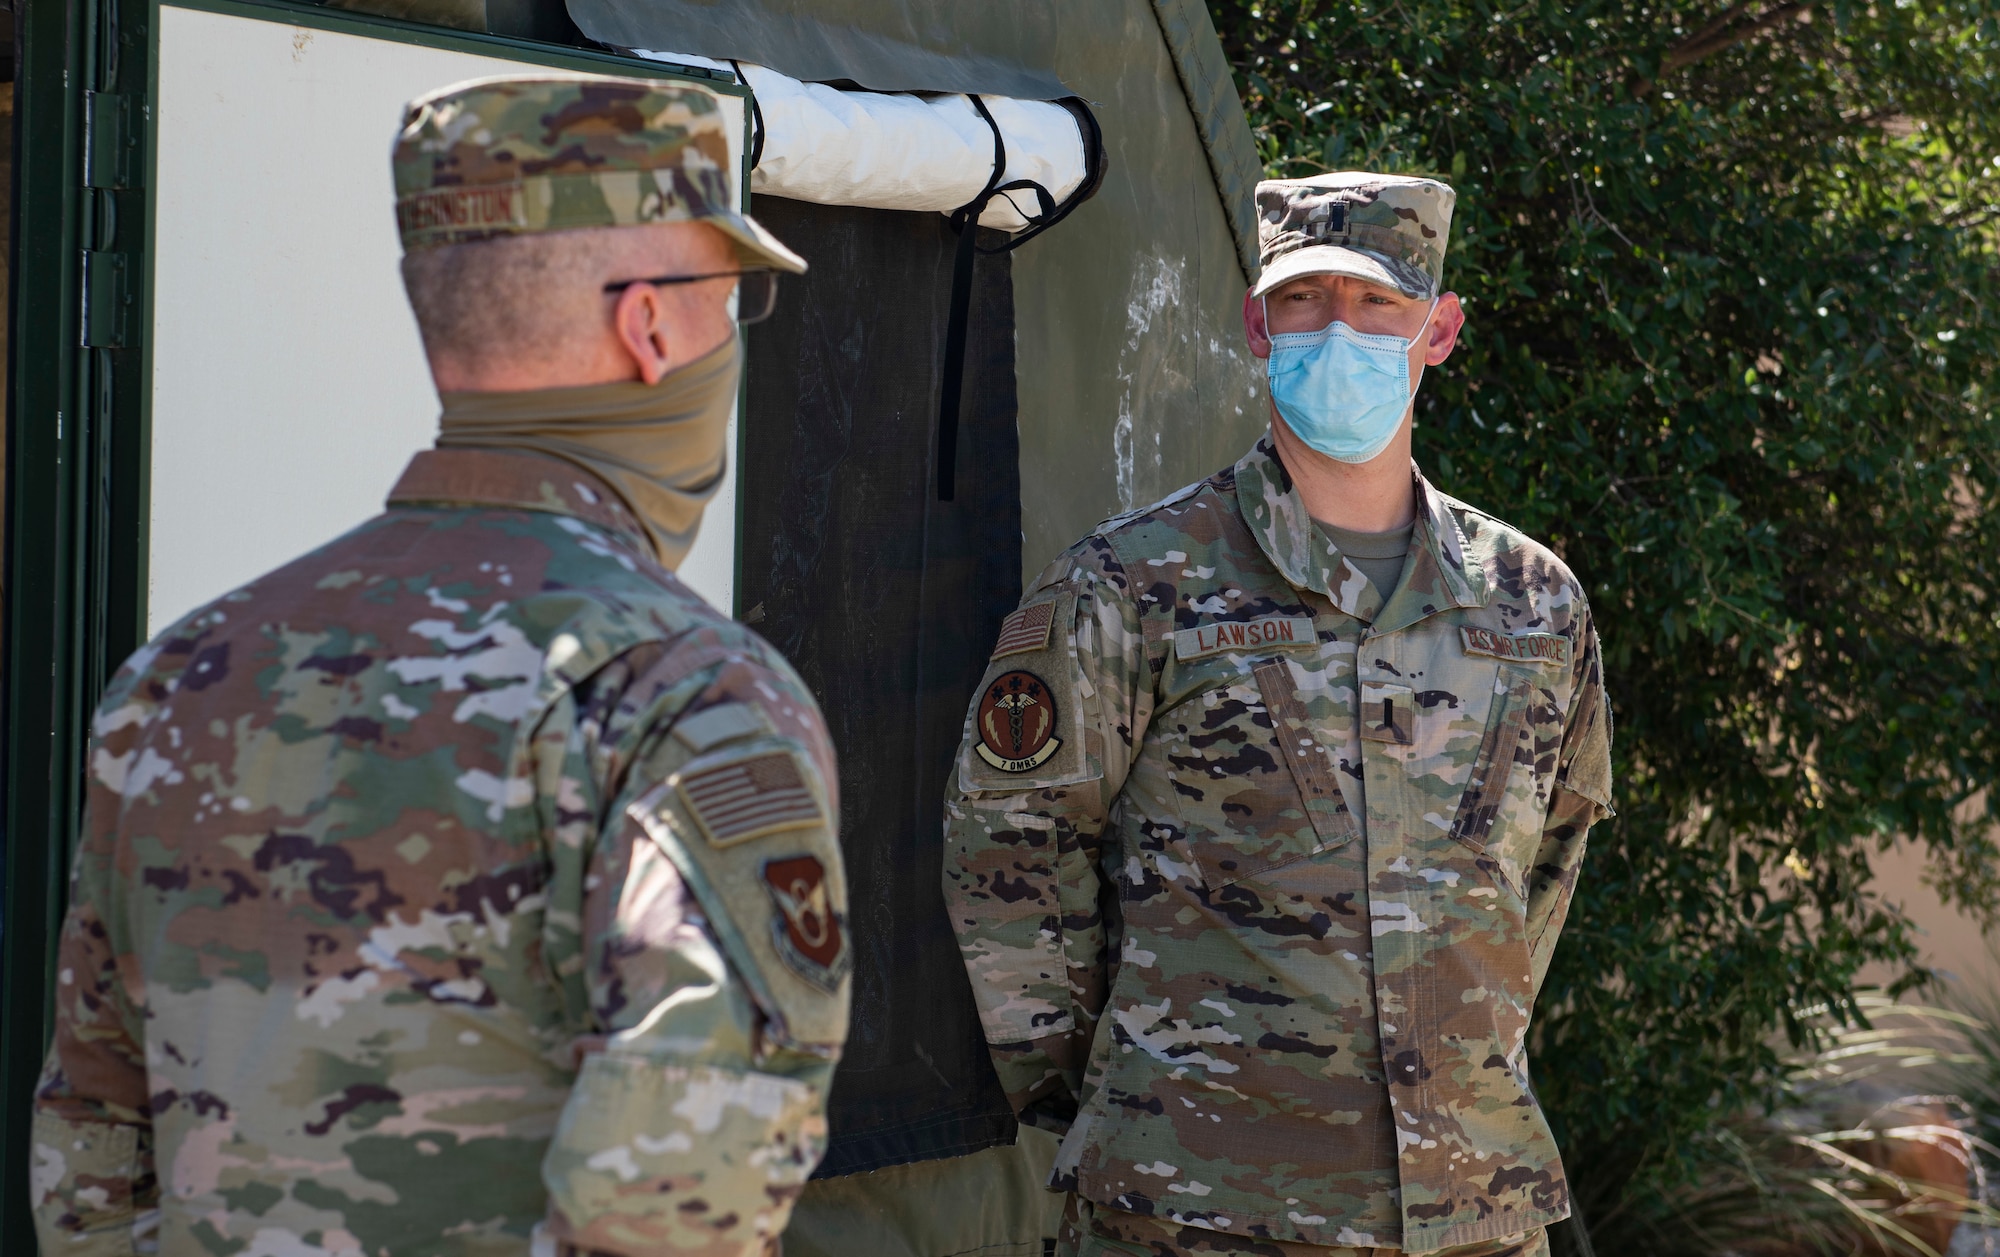 Maj. Gen. Mark Weatherington, 8th Air Force and Joint-Global Strike Operations Center commander, left, speaks with 1st Lt. William Lawson, 7th Operational Medical Readiness Squadron physician assistant, at Dyess Air Force Base, Texas, Aug. 11, 2020.